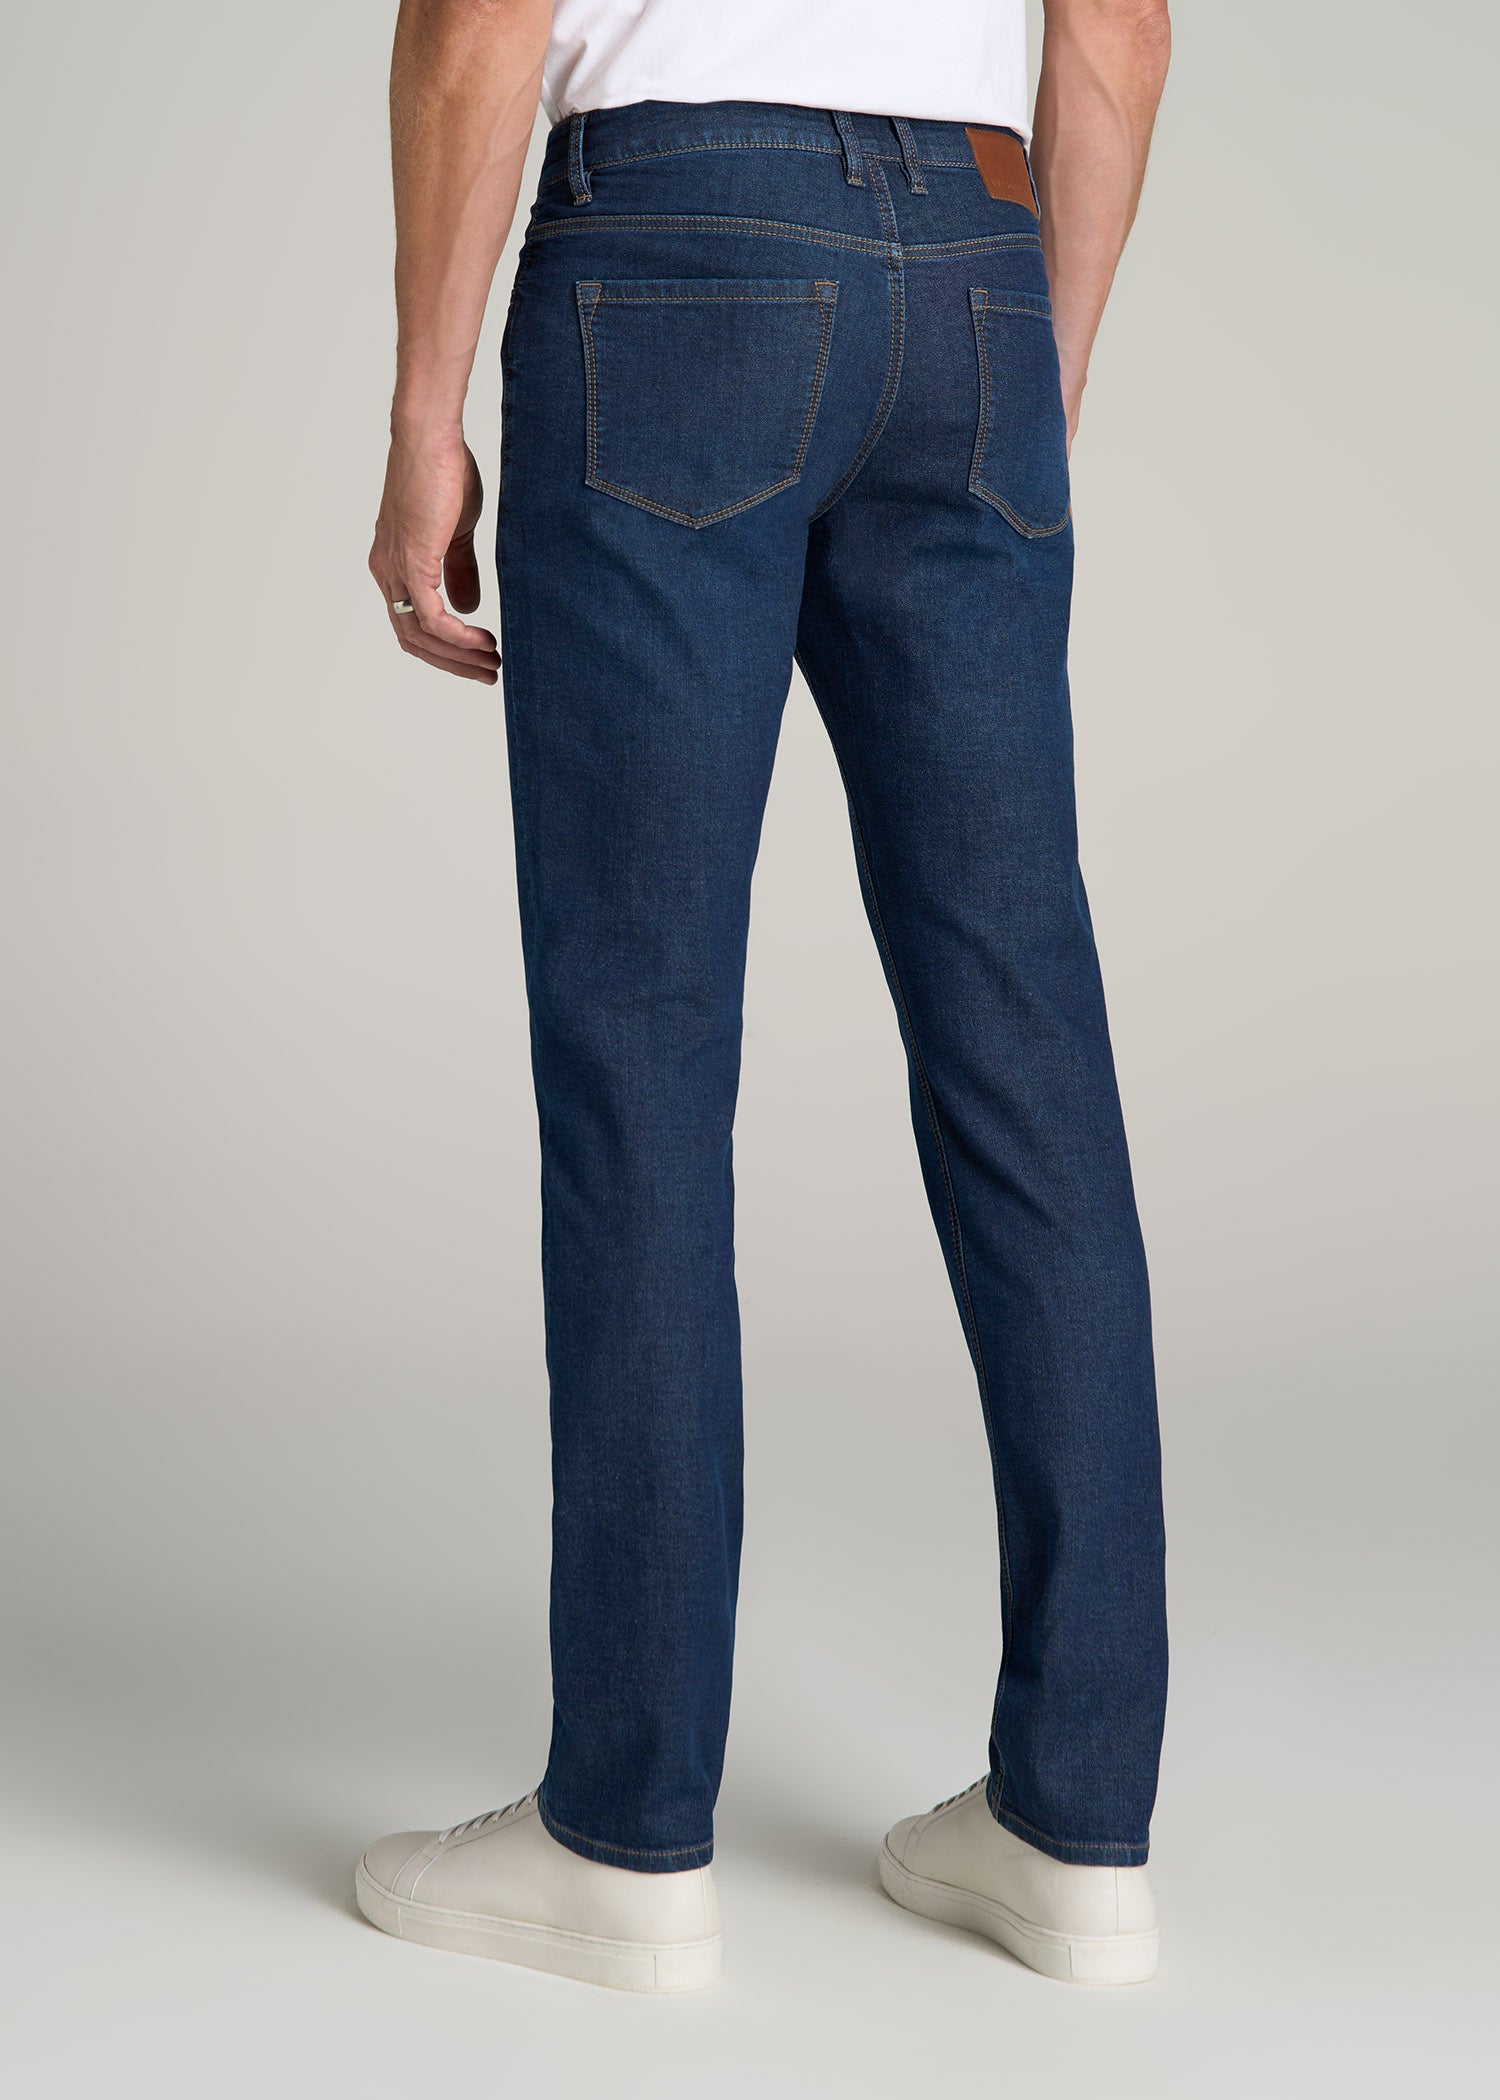 Dylan Slim Fit Fleeced Jeans for Tall Men | American Tall